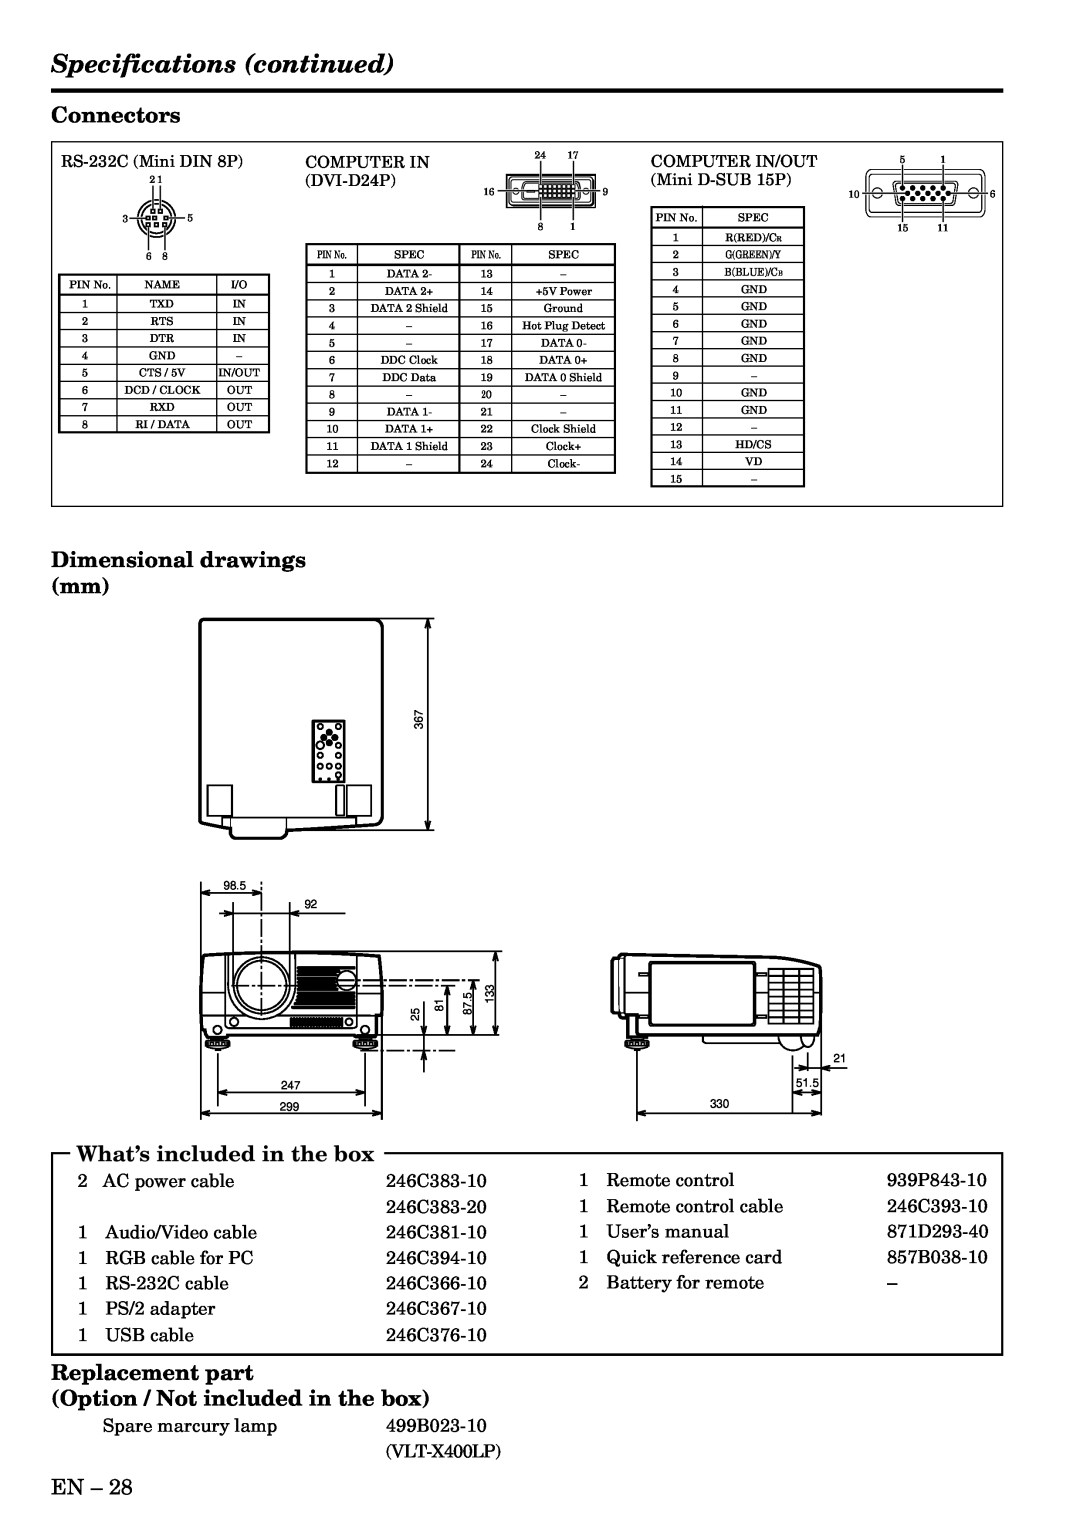 Mitsubishi Electronics LVP-X400U Specifications continued, Connectors, Dimensional drawings mm, What’s included in the box 